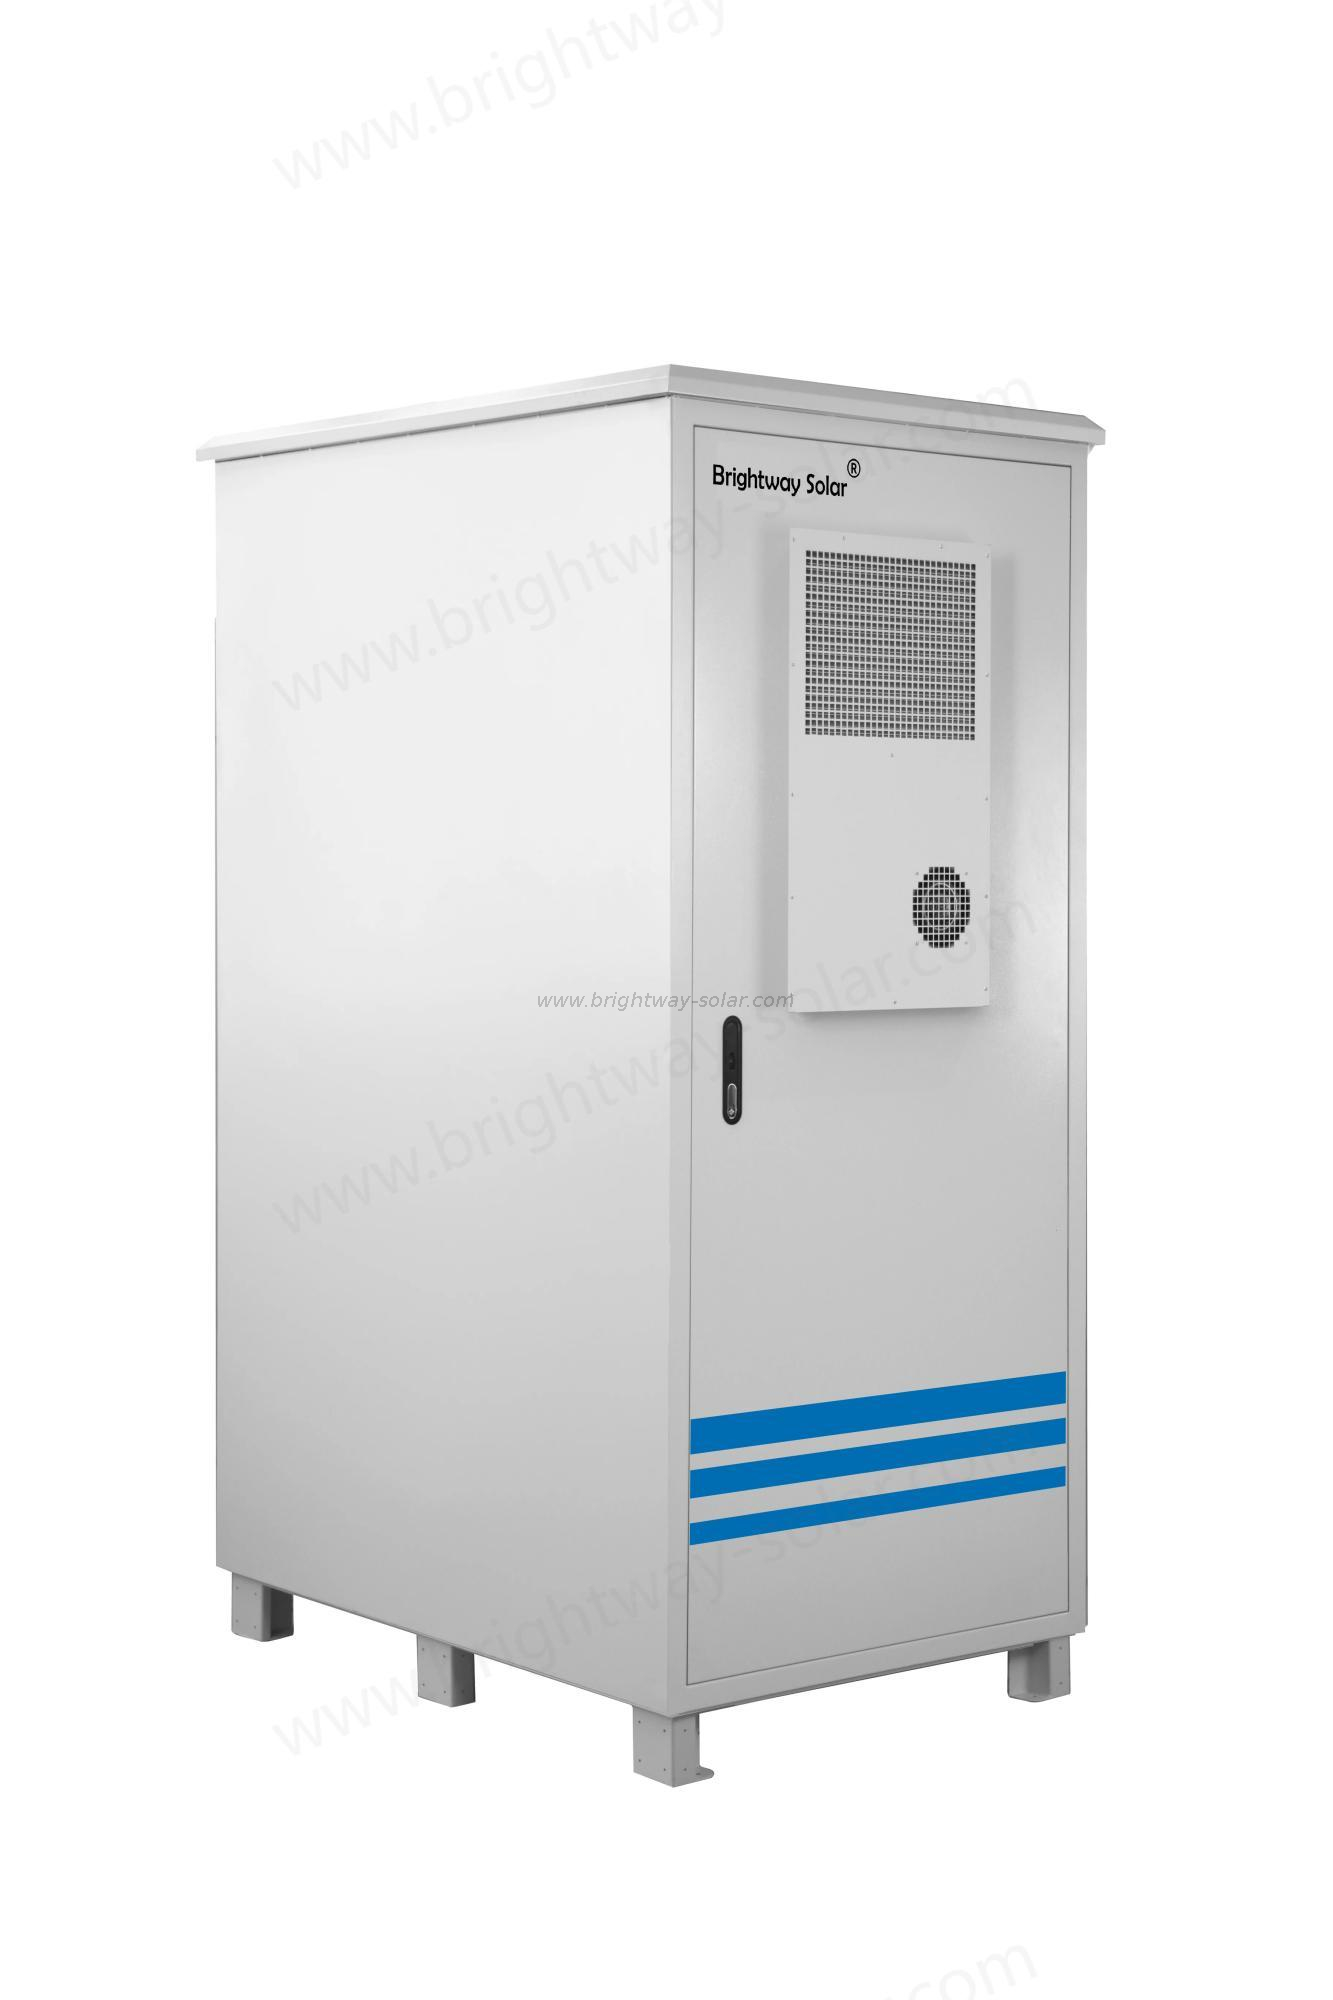 Brightway Solar Outdoor IP54 Rated LFP Battery Air Cooled Energy Storage Cabinet 50kW 200kWh Solution for Outdoor Use